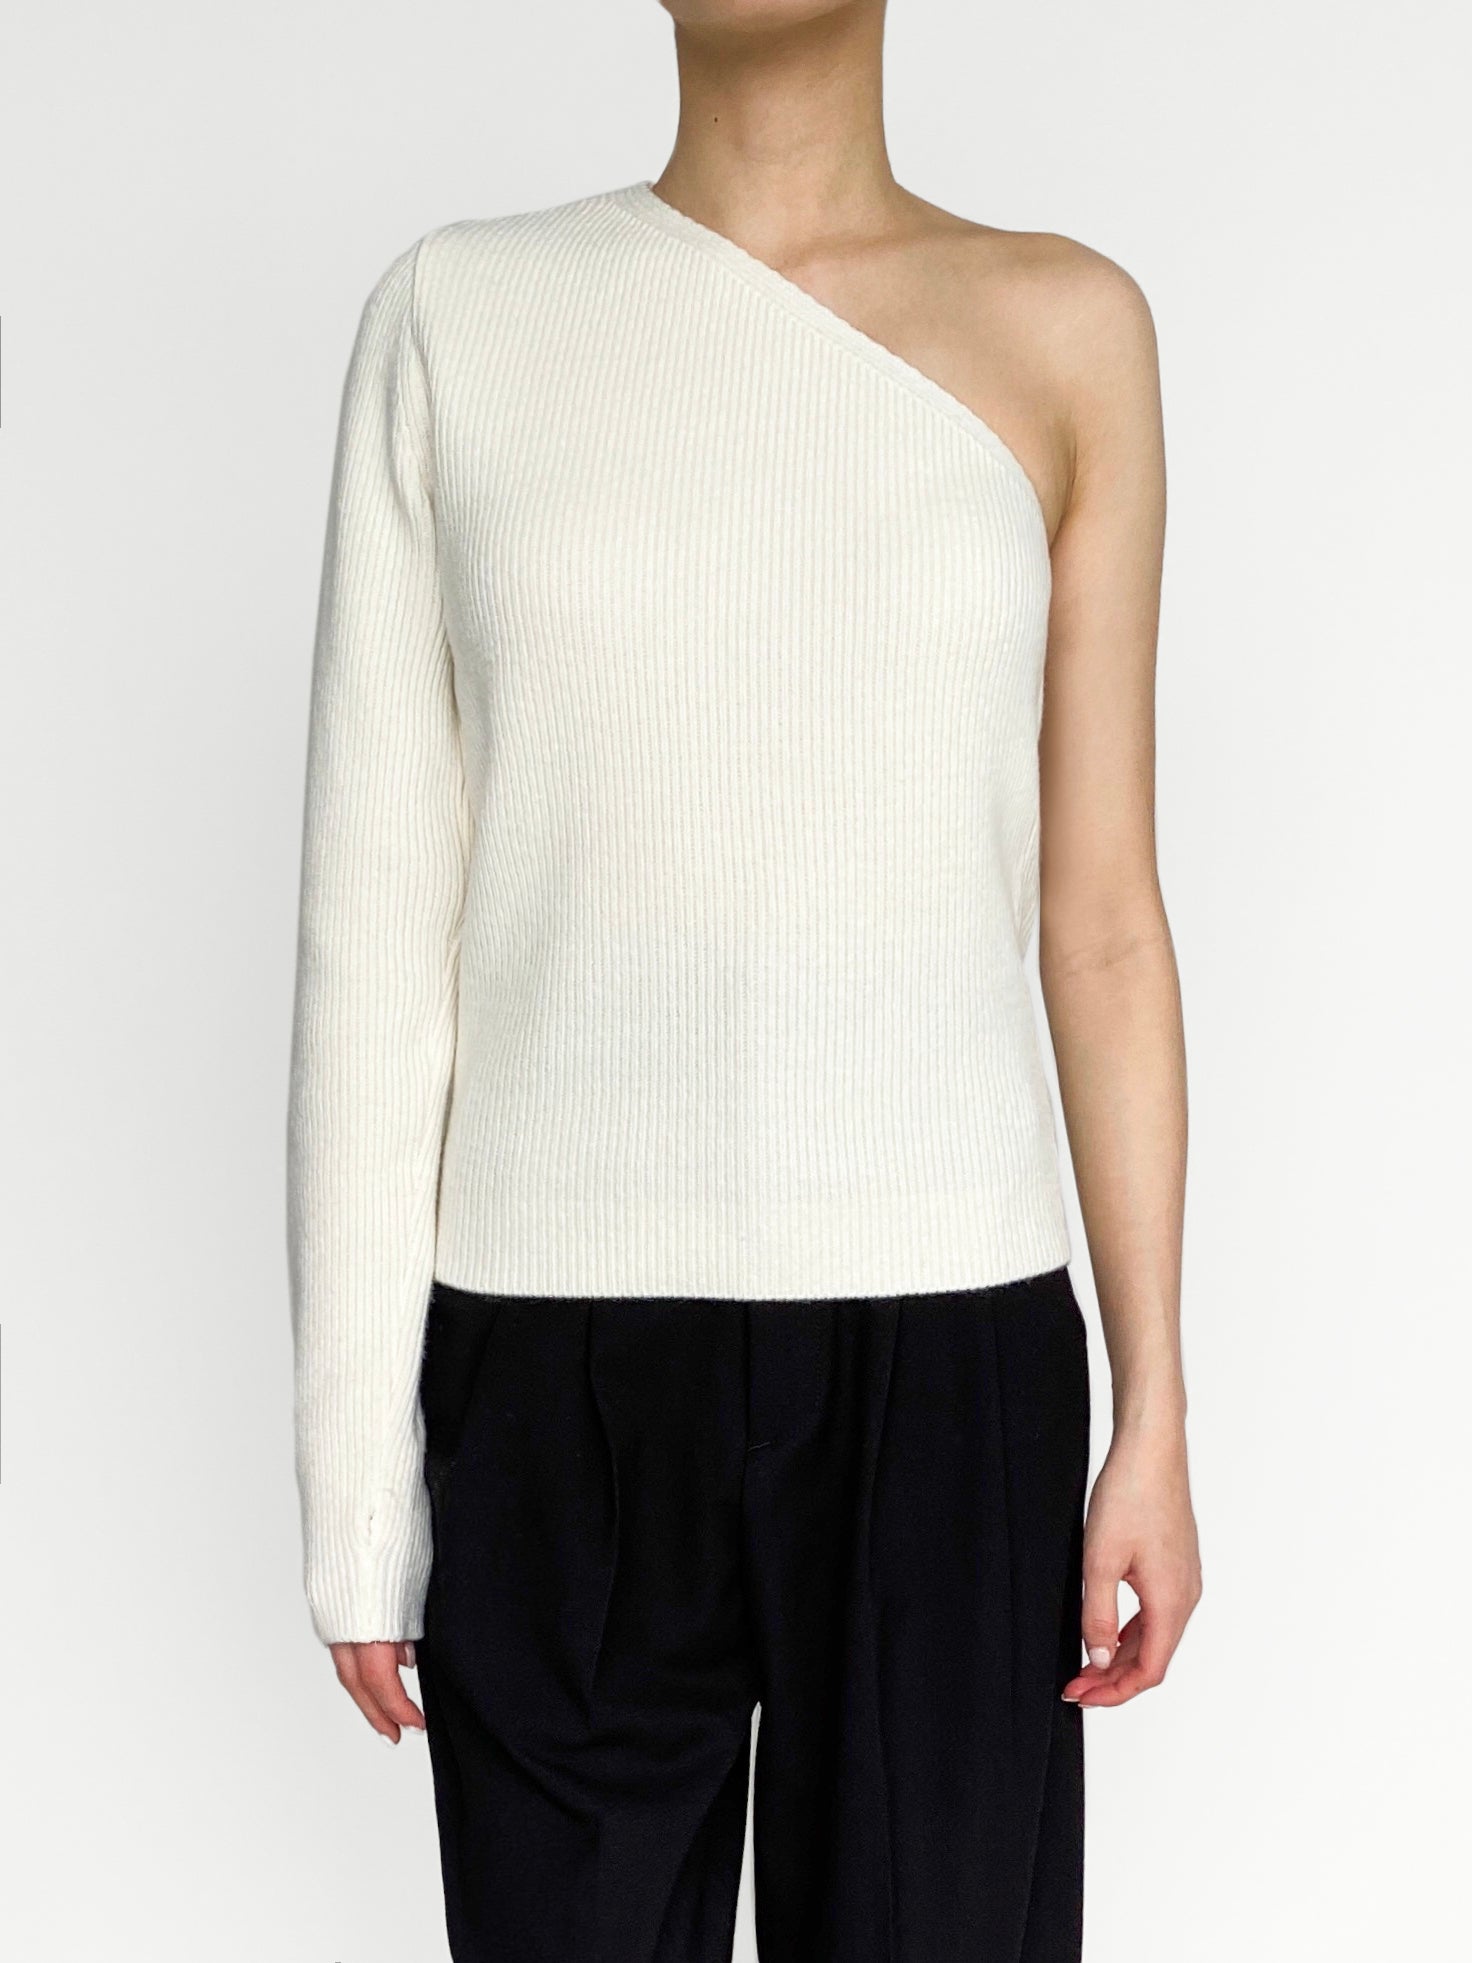 Naomi Wool Knit Top in Ivory